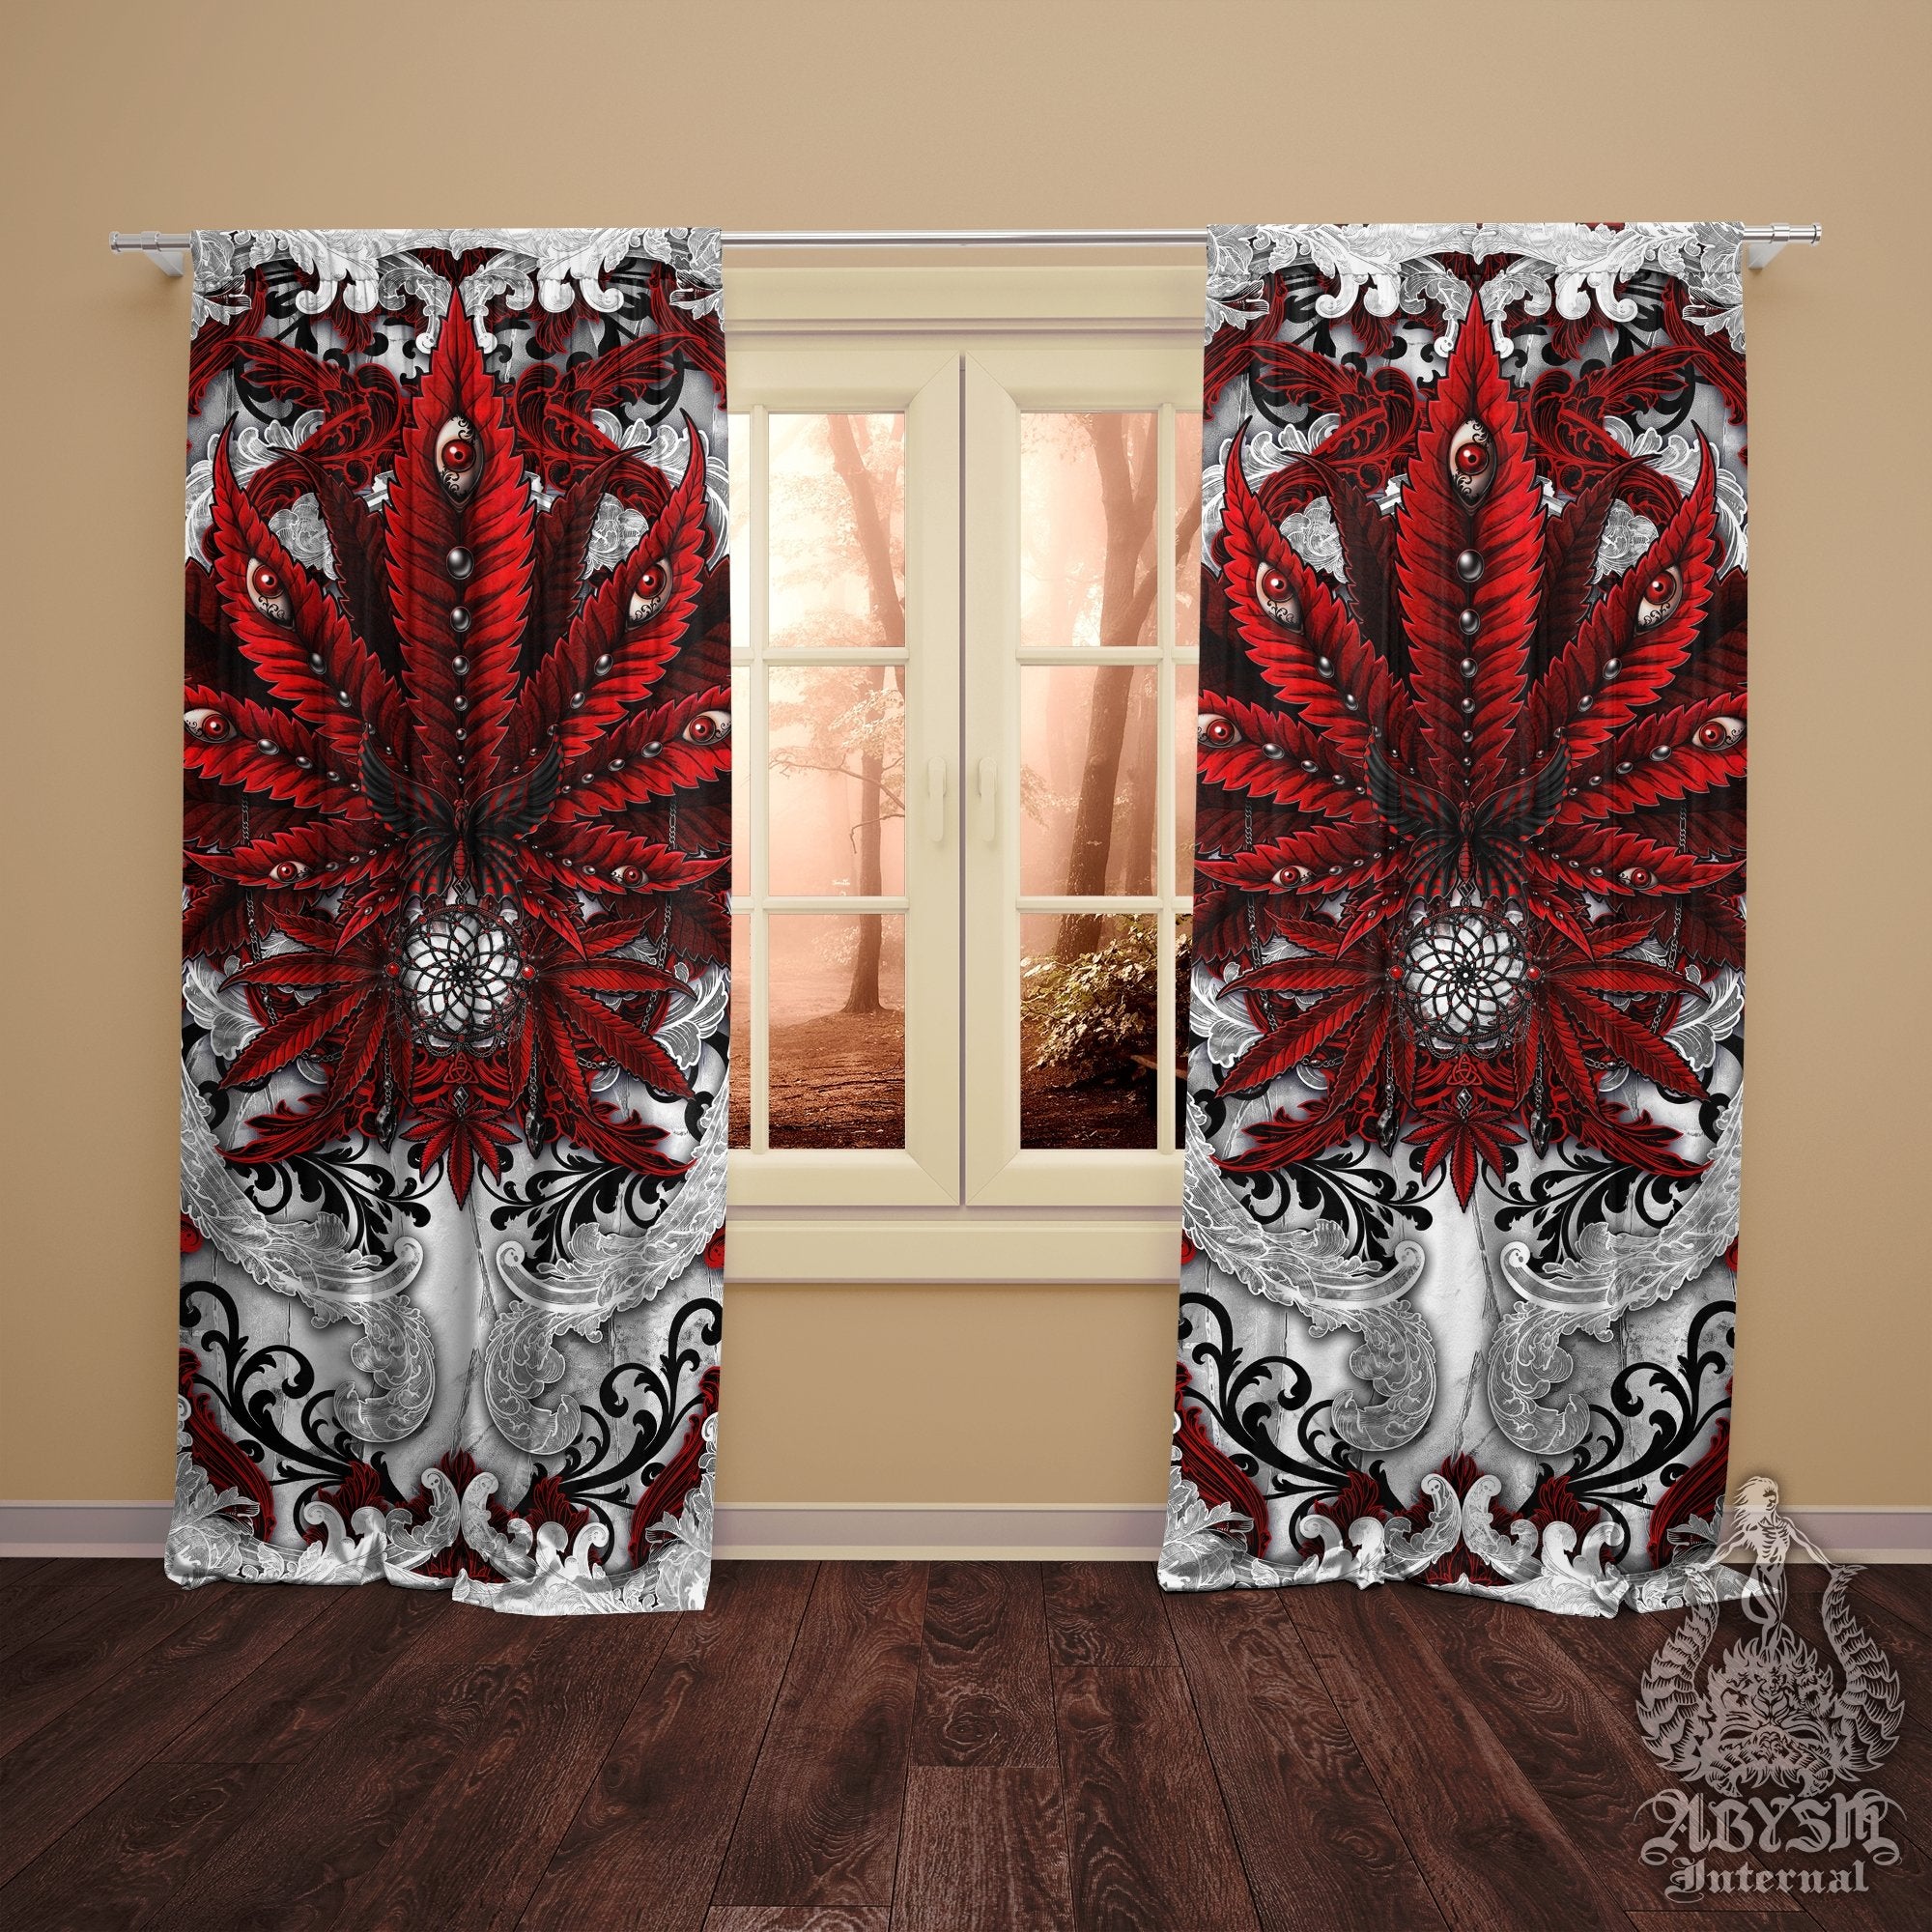 Weed Blackout Curtains, Cannabis Home and Shop Decor, Long Window Panels, Indie 420 Room Art Print - Bloody White Goth - Abysm Internal